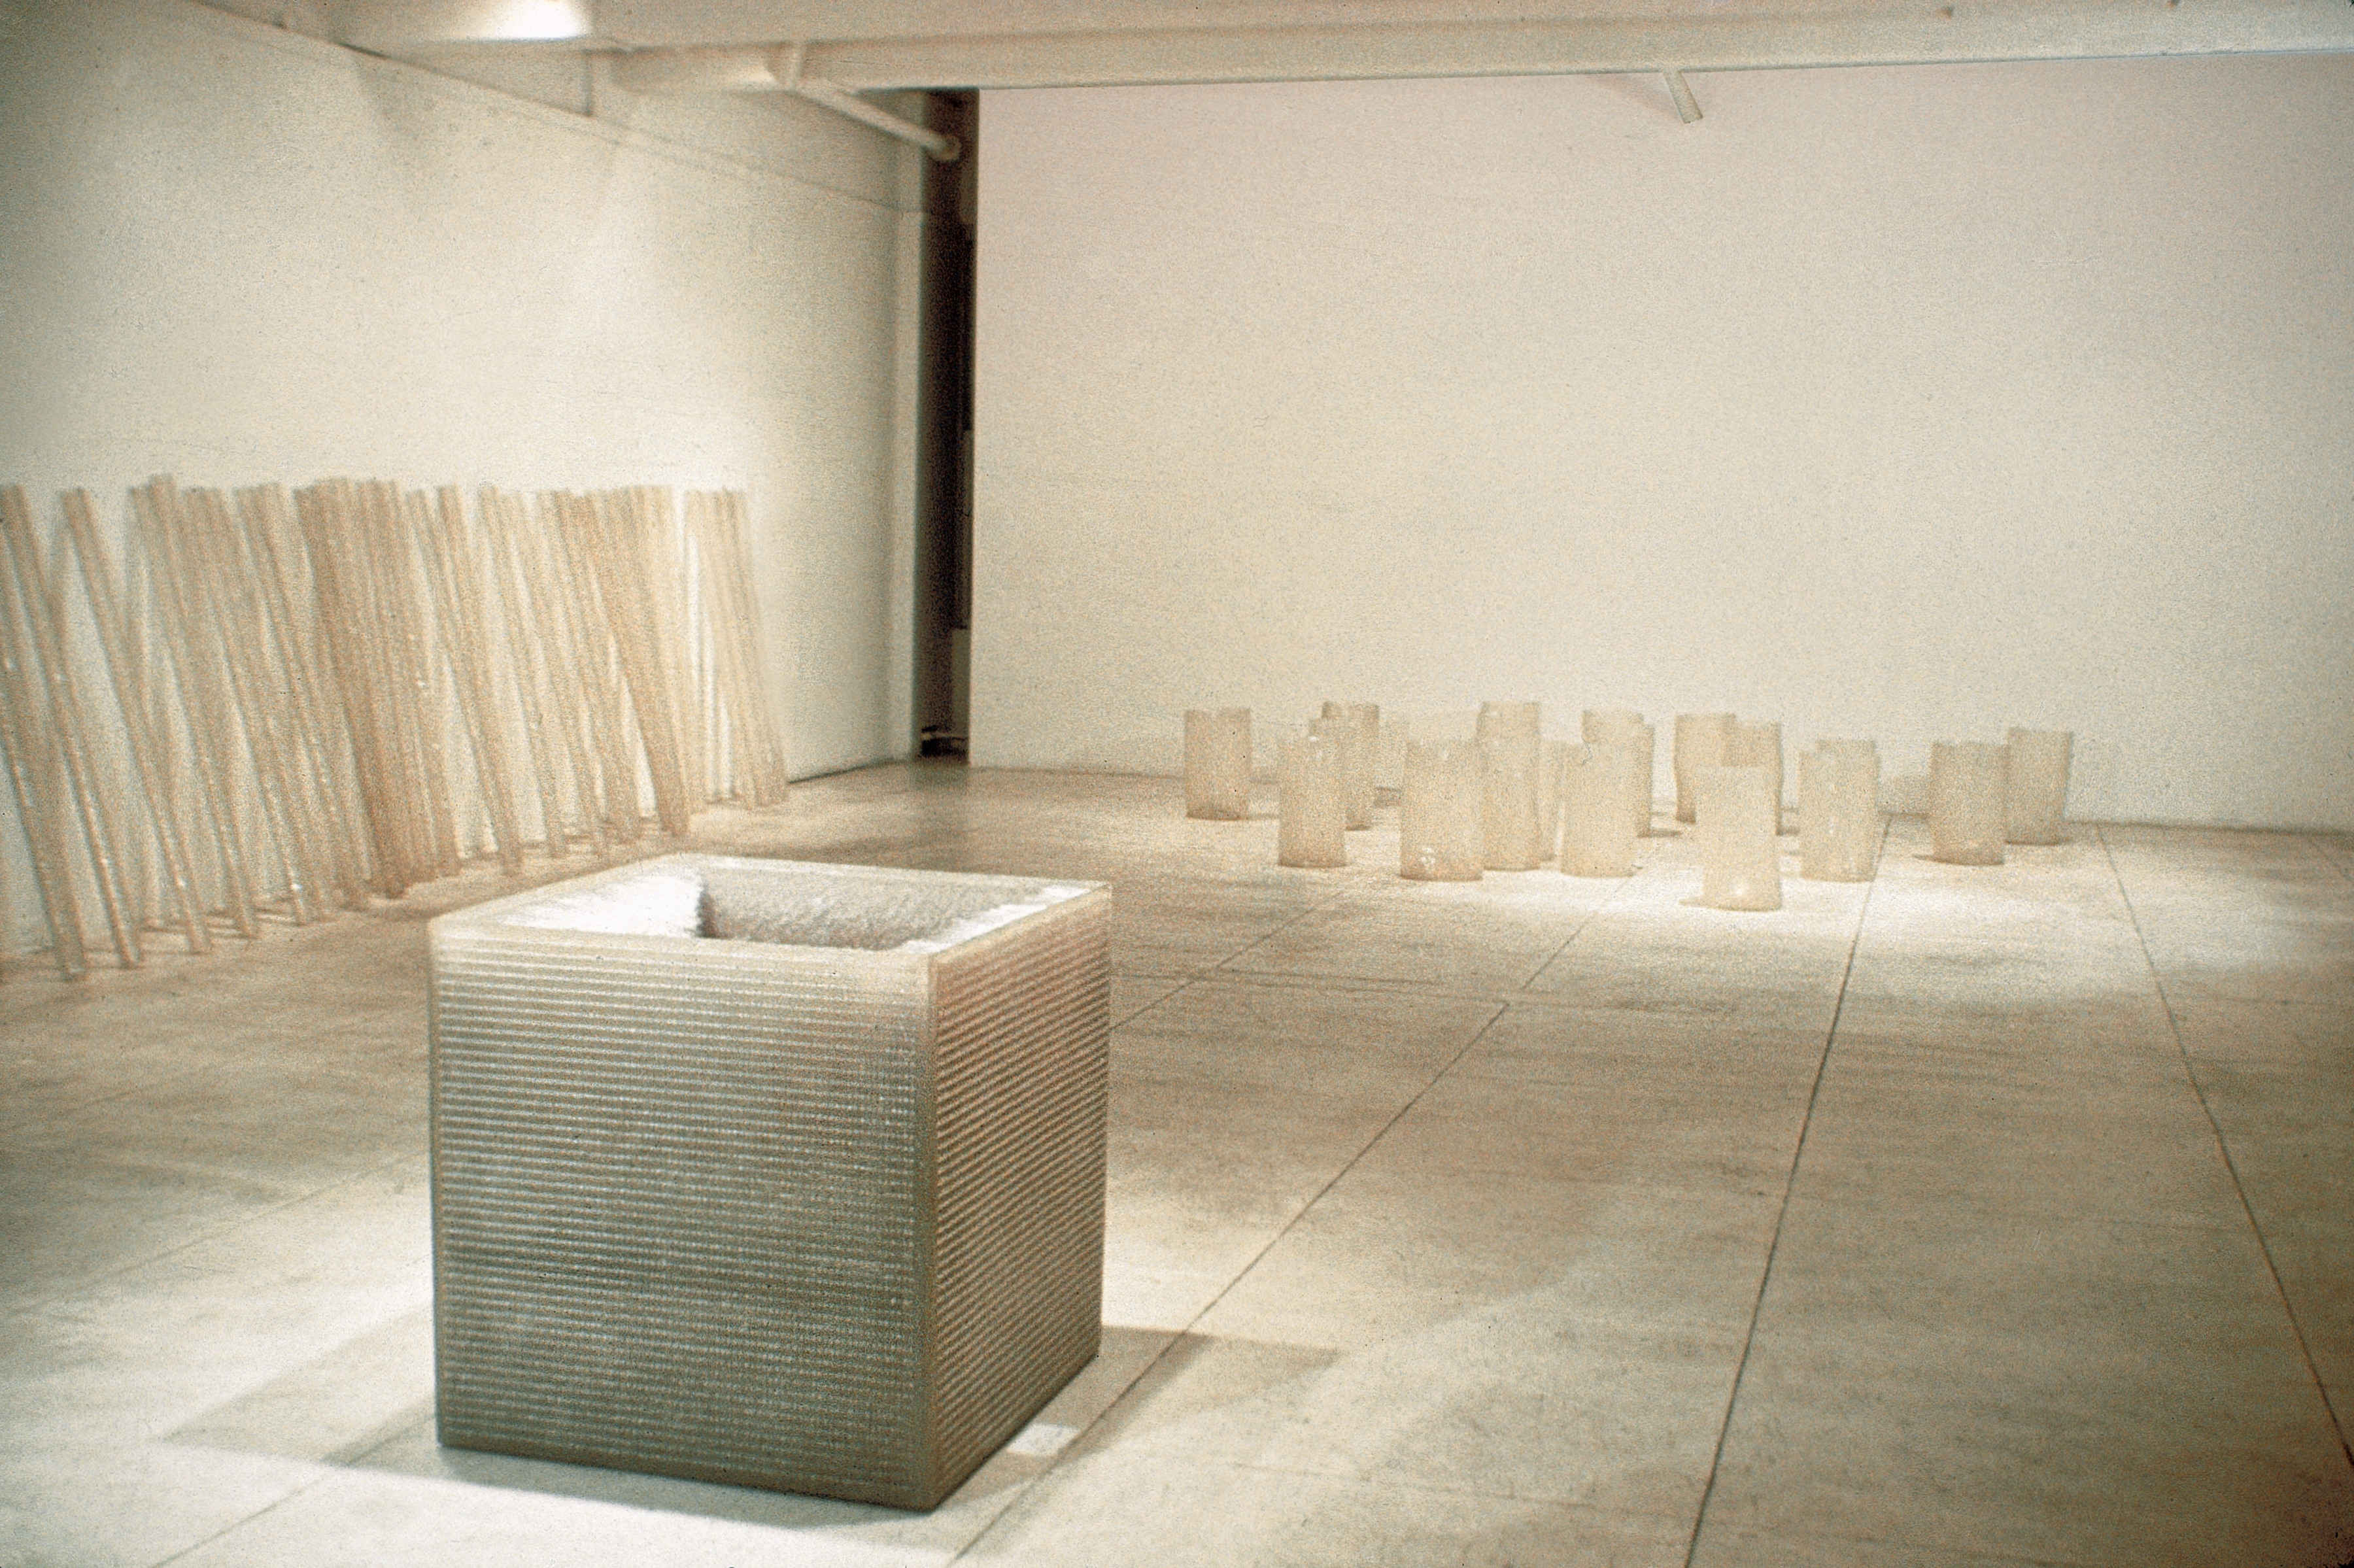 Installation view of Eva Hesse: Chain Polymers at Fischbach Gallery, New York, 1968
Image&amp;nbsp;courtesy The Estate of Eva Hesse. Courtesy Hauser &amp;amp; Wirth.